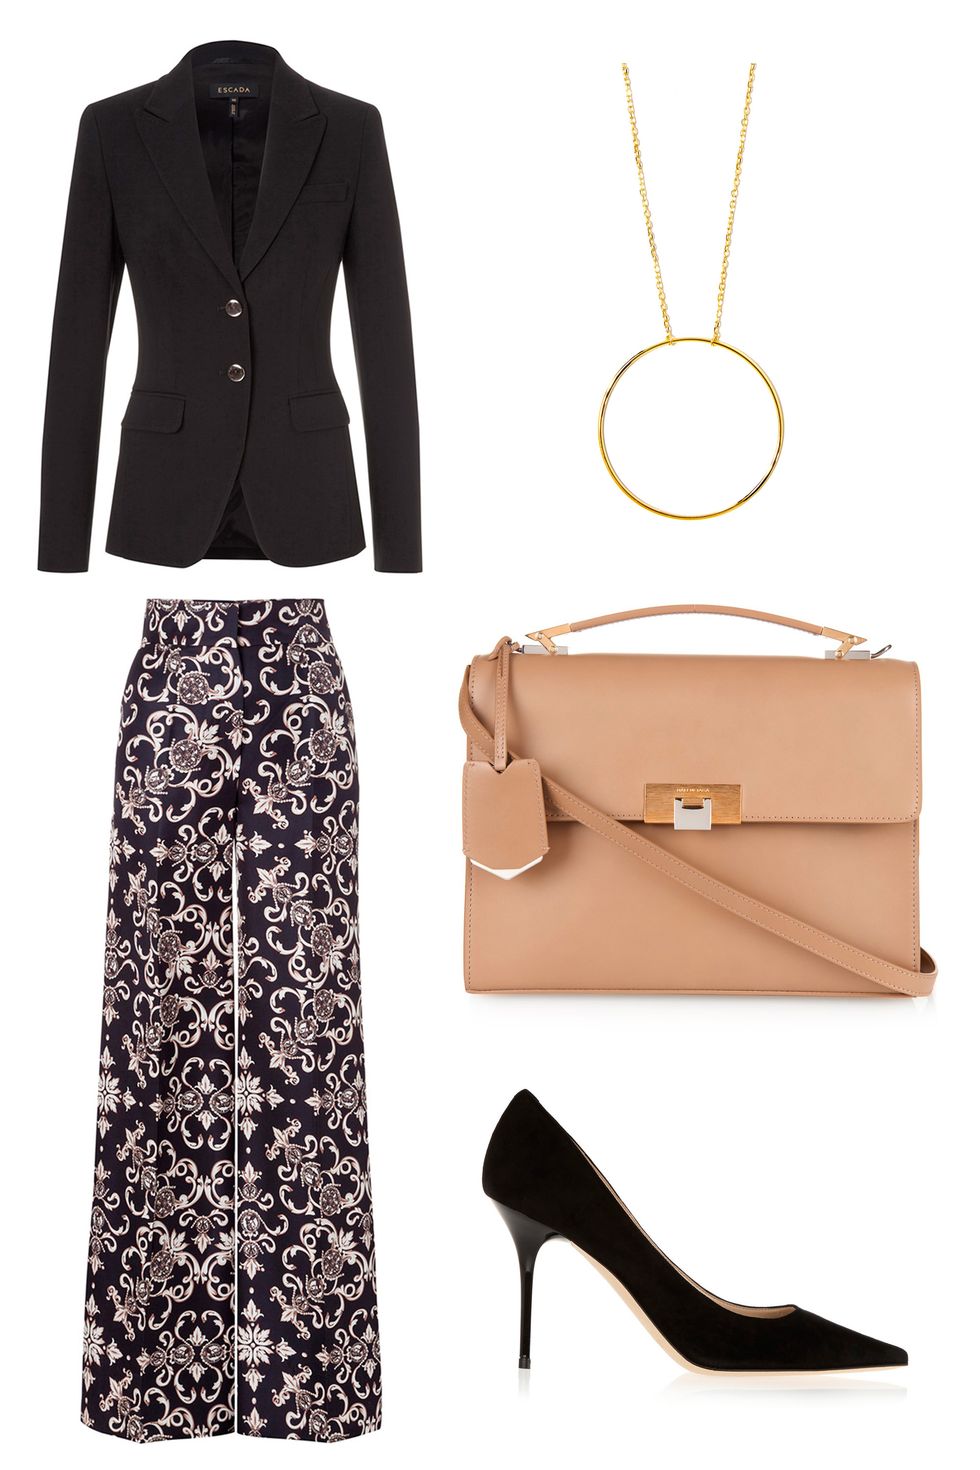 Escada outfit - for work